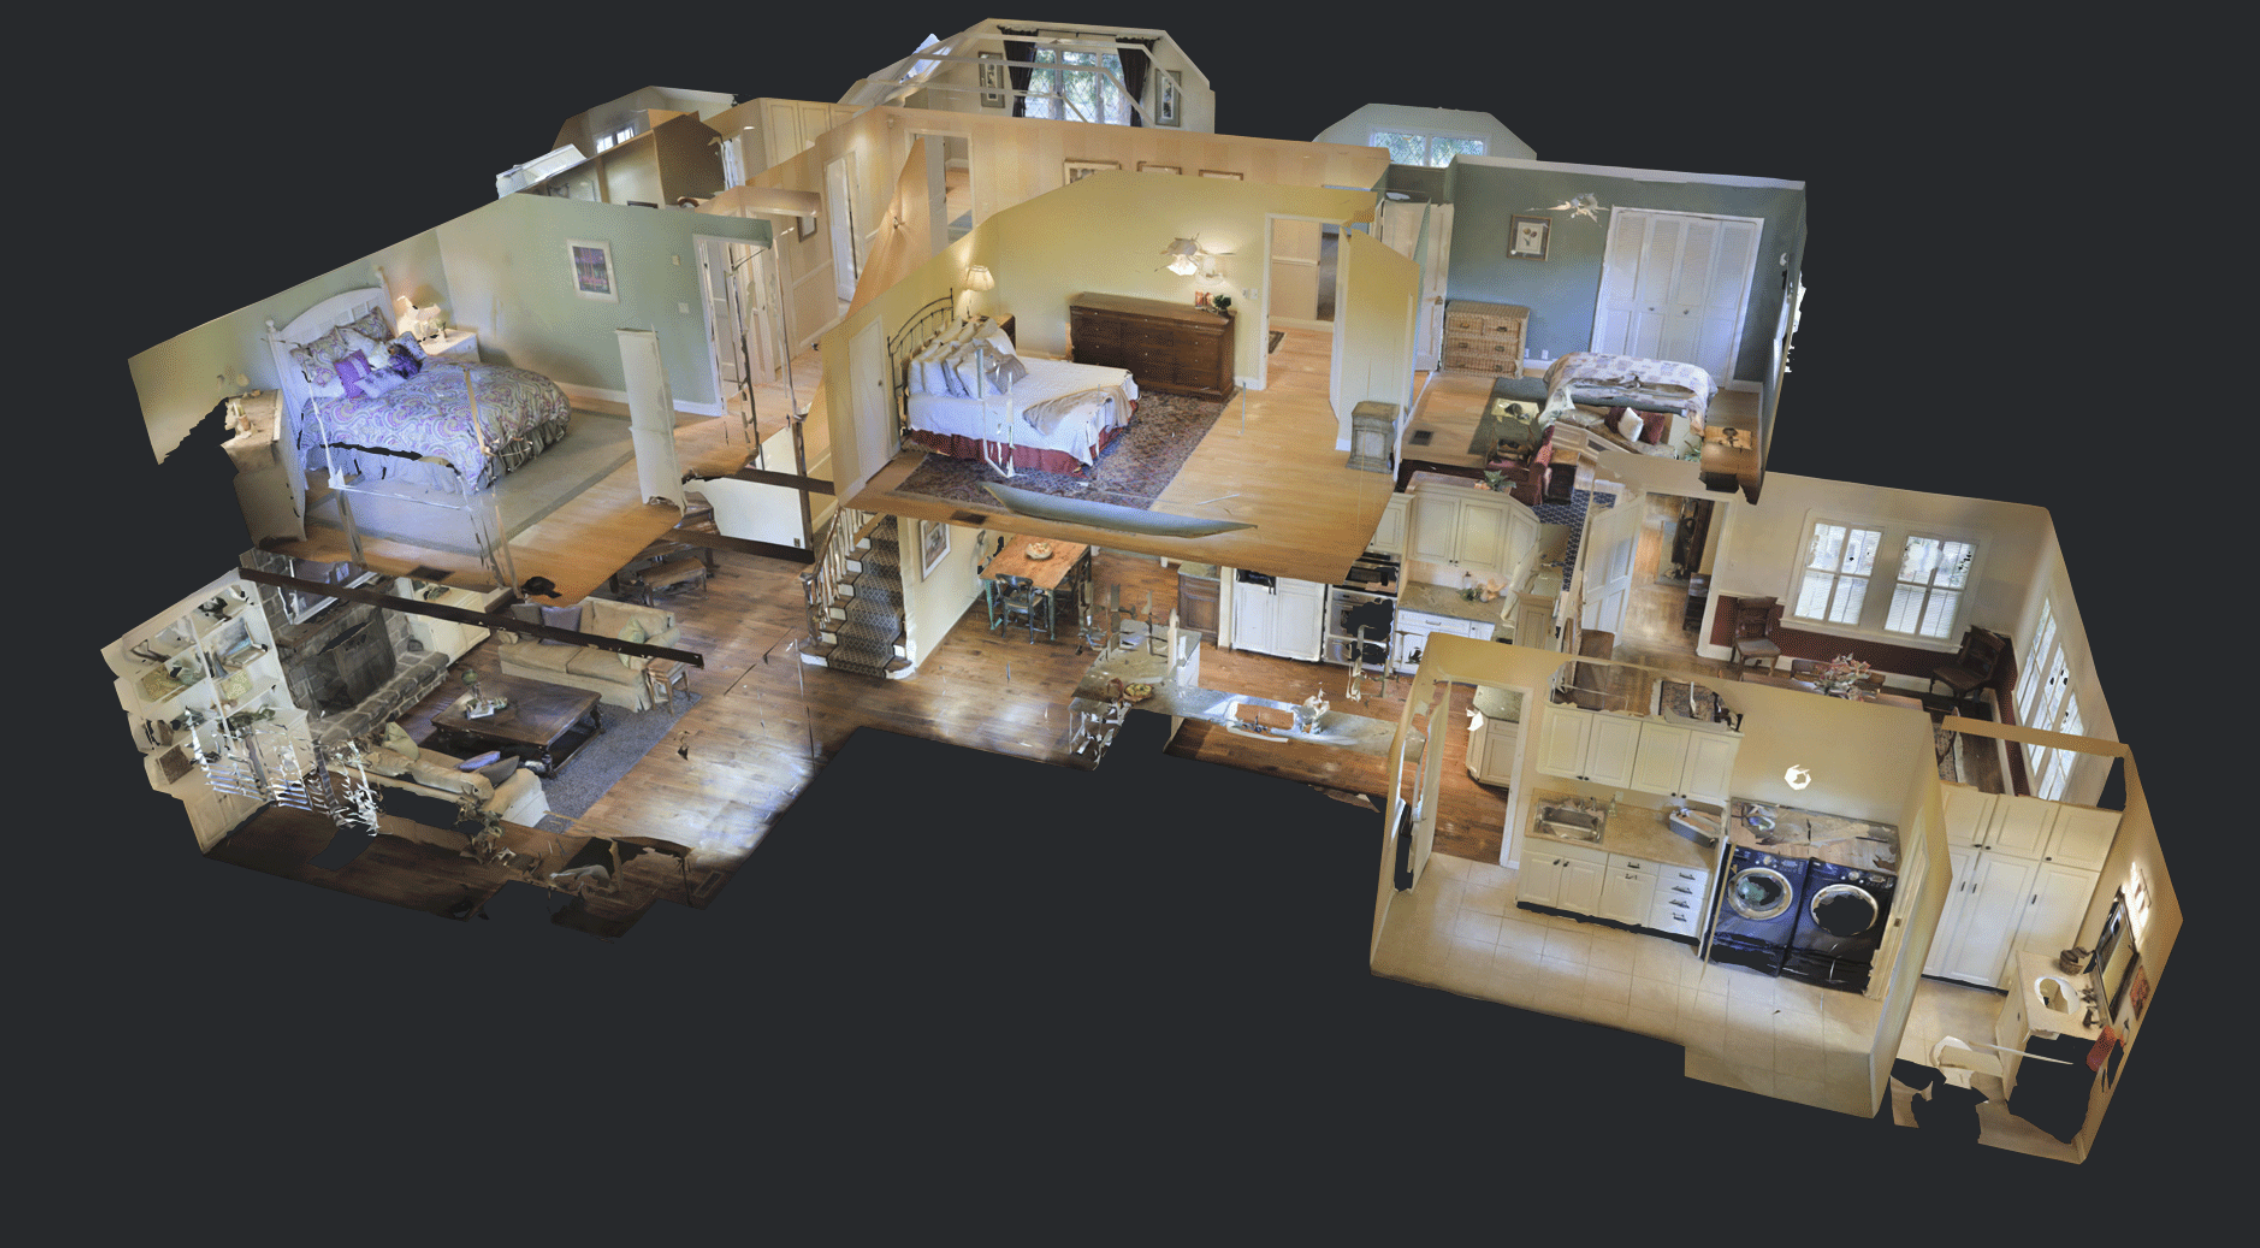 The dollhouse view found in the Matterport 3D digital twin and virtual tour